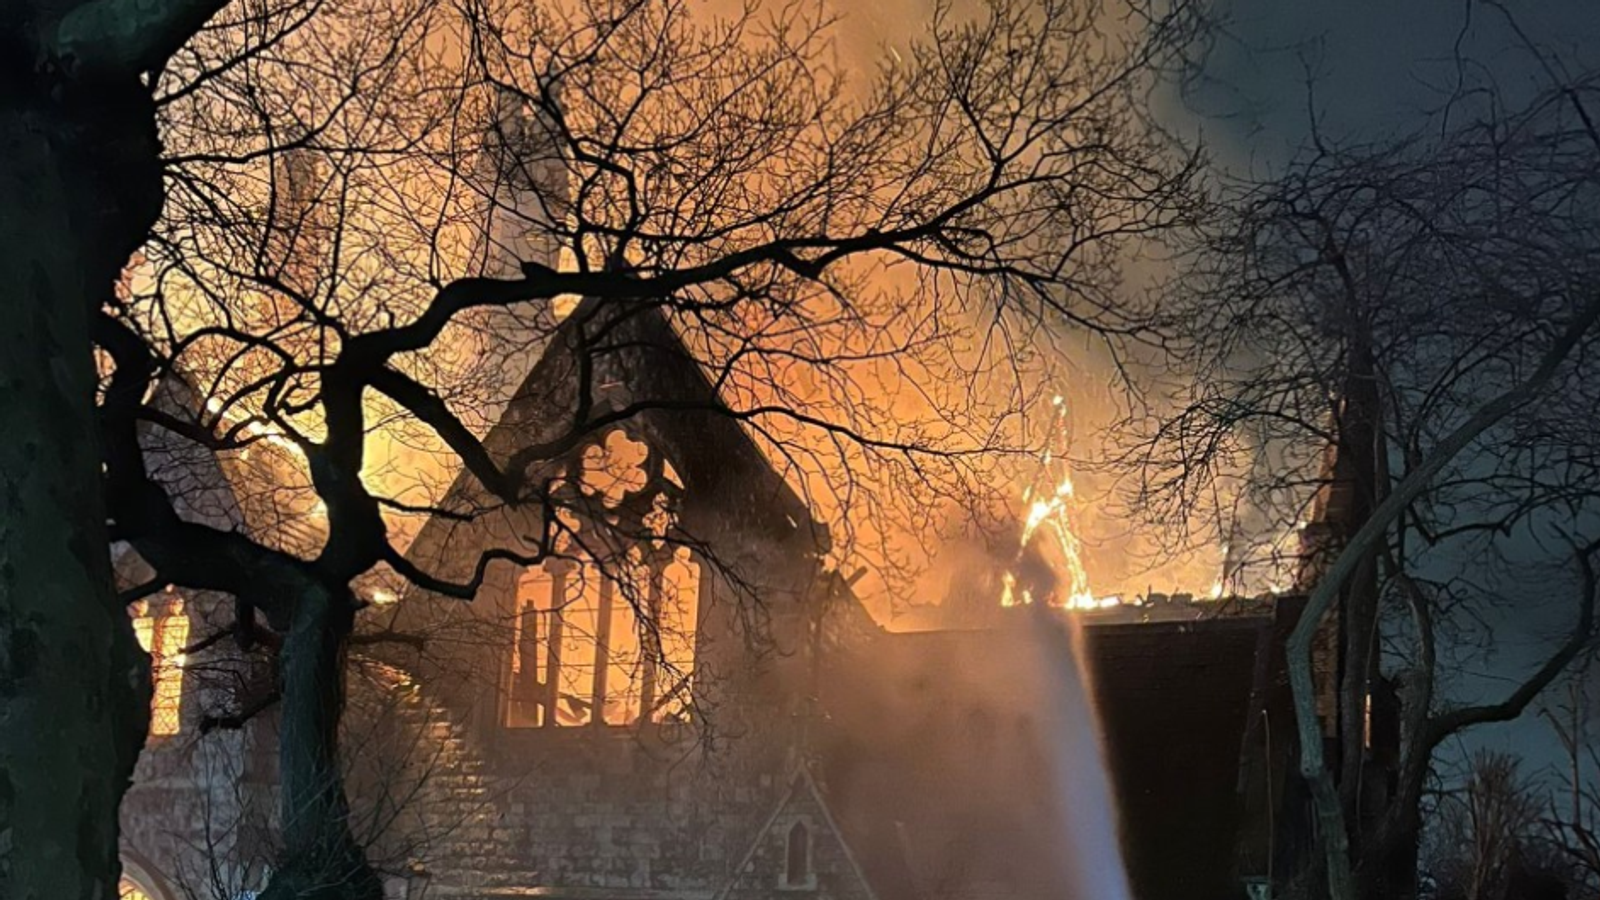 Fire destroys heritage-listed church in London